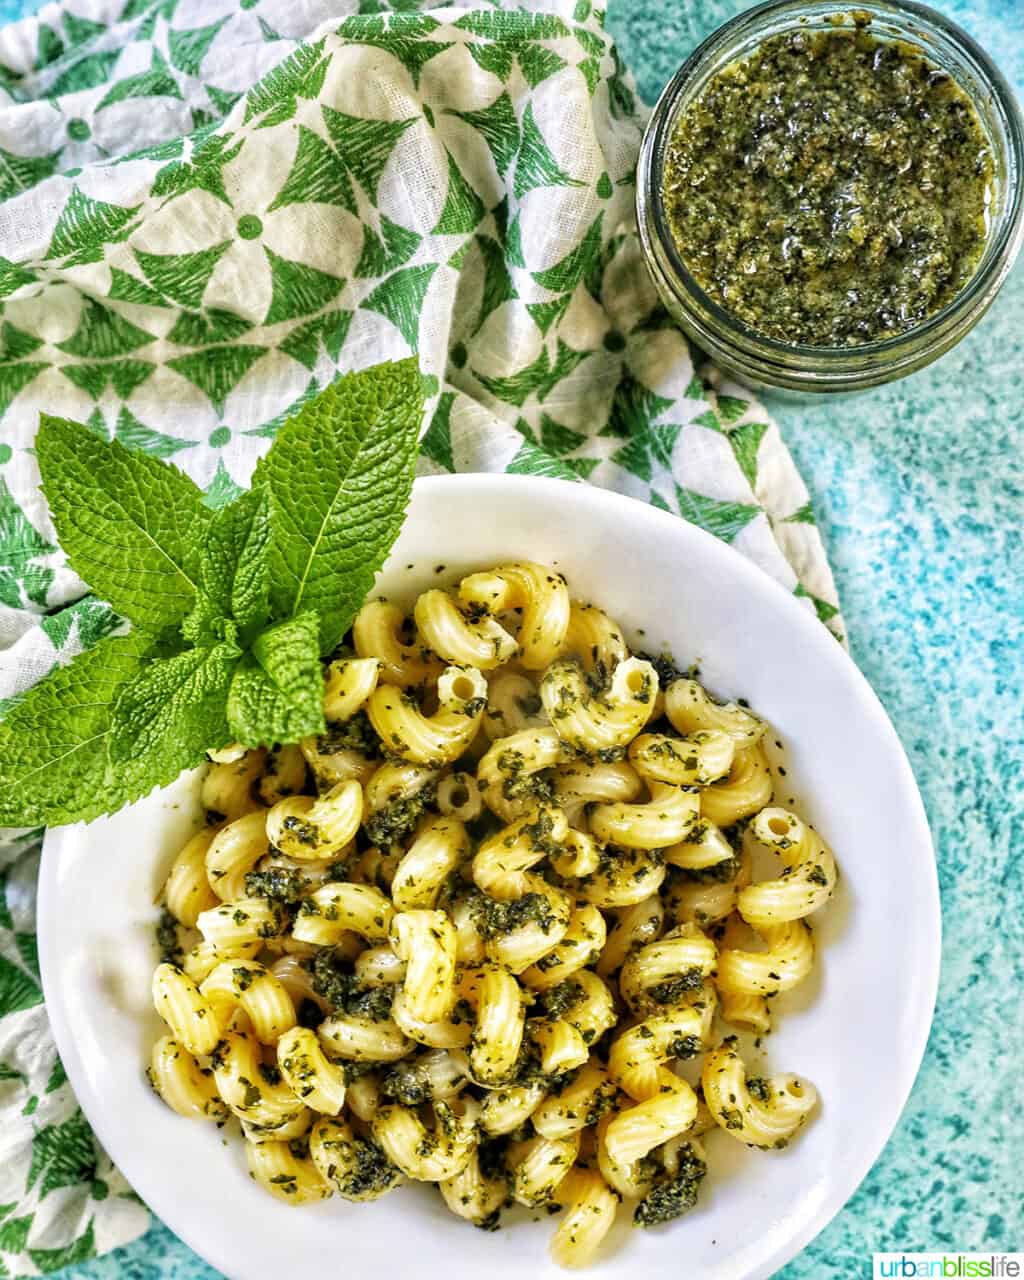 white bowl with pasta and mint pesto with mint leaves as garnish, with a jar of mint pesto in the top right corner, all on a bright blue background with green and white napkin to the left side.